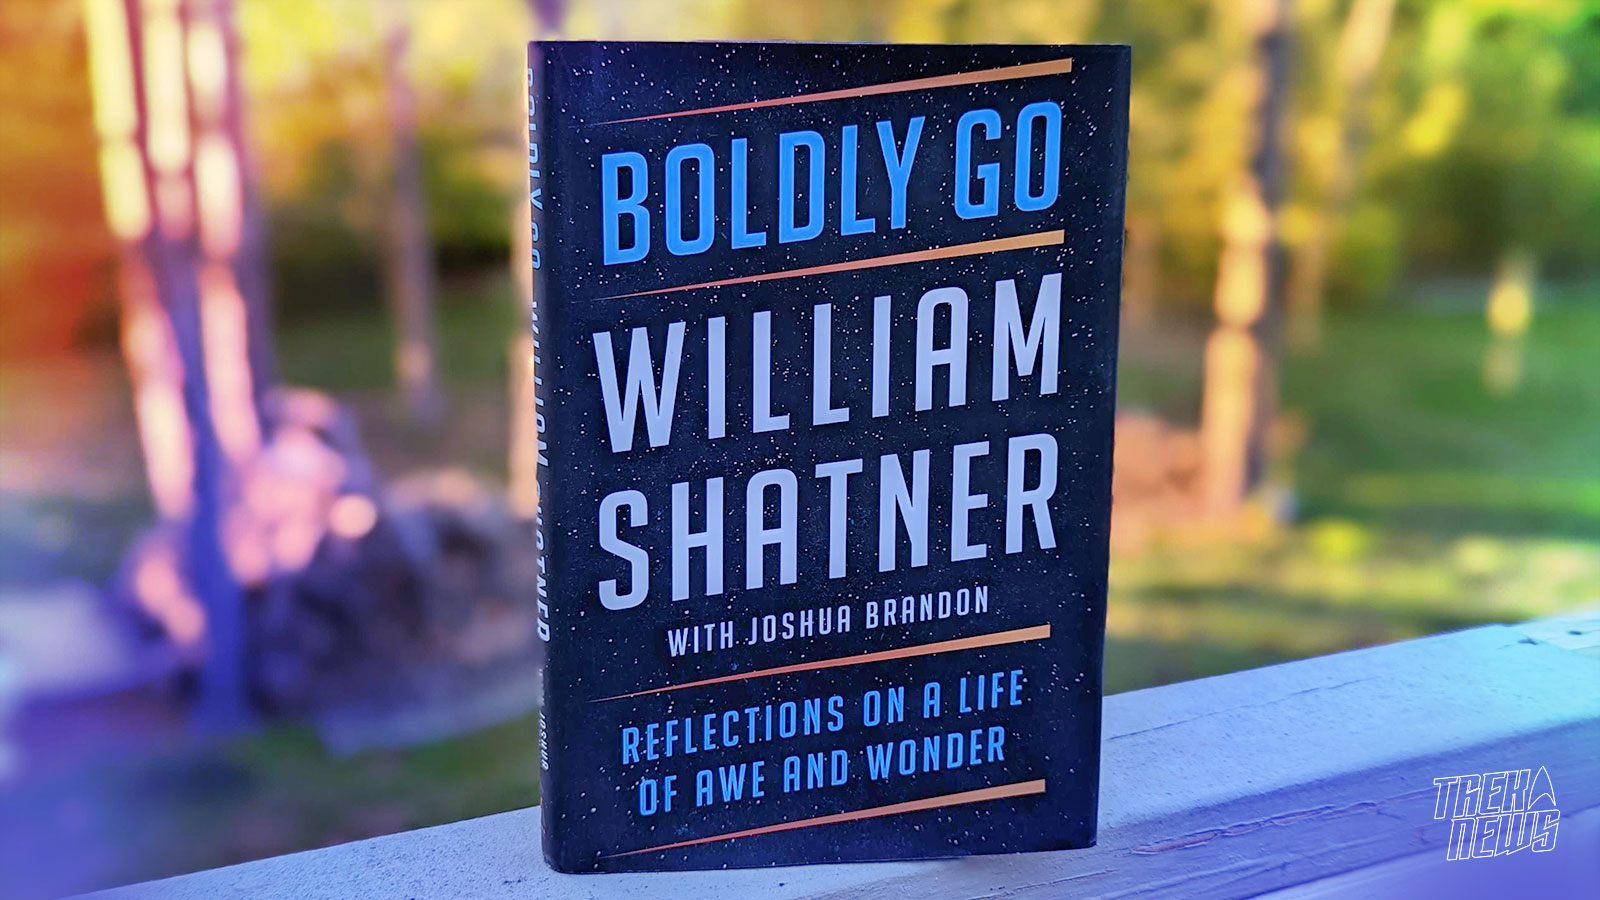 William Shatner's New Book 'Boldly Go: Reflections on a Life of Awe and Wonder' Review: More of a good thing